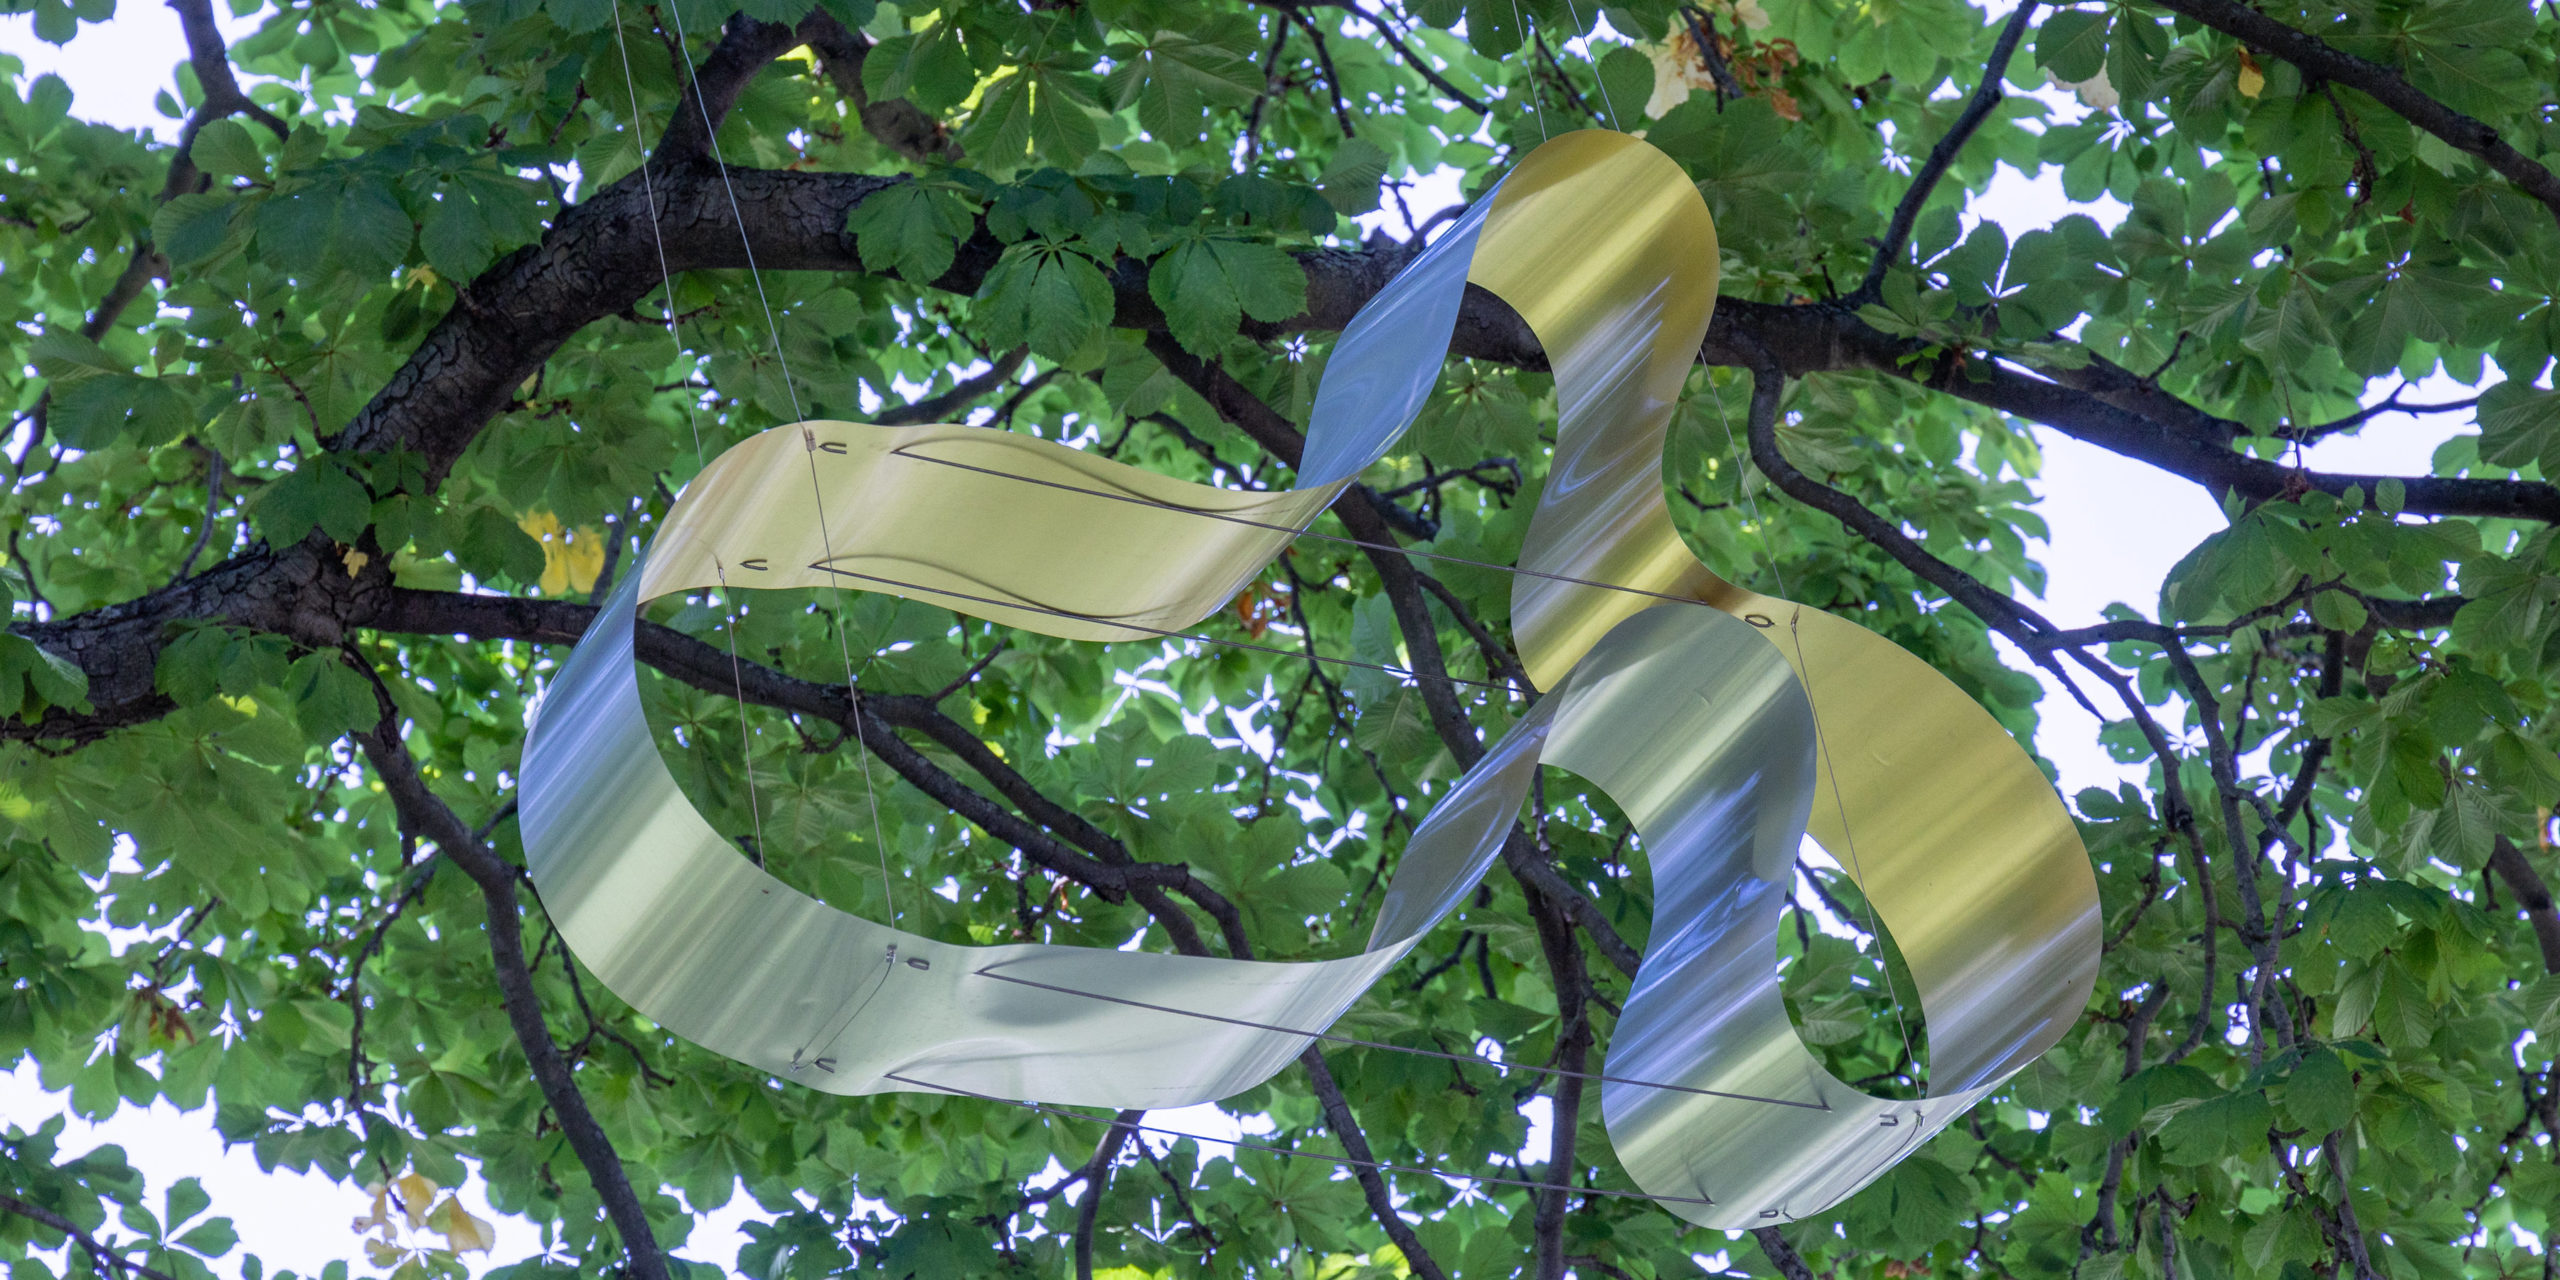 Sculpture suspended from a tree viewed from below